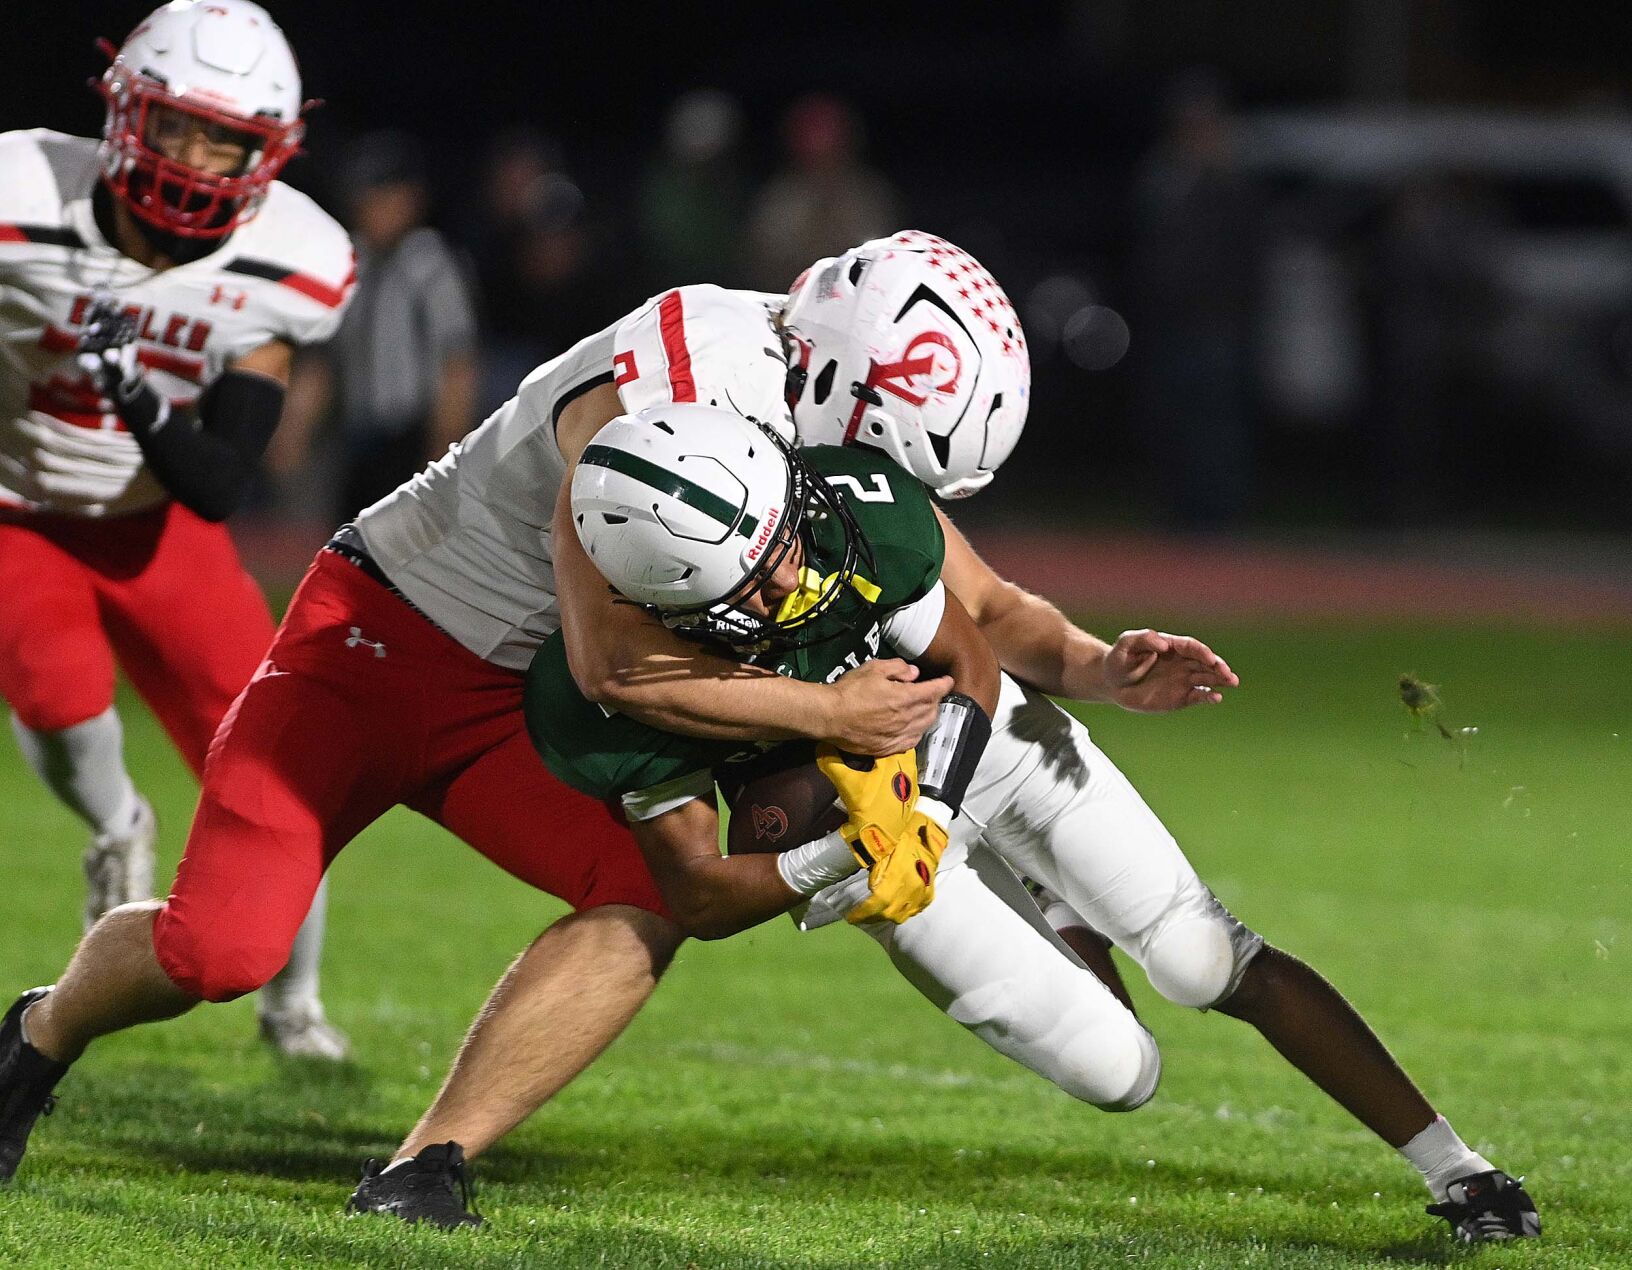 Cumberland Valley’s Alex Sauve notches 2023 Pa. Football Writers 6A All-State selection